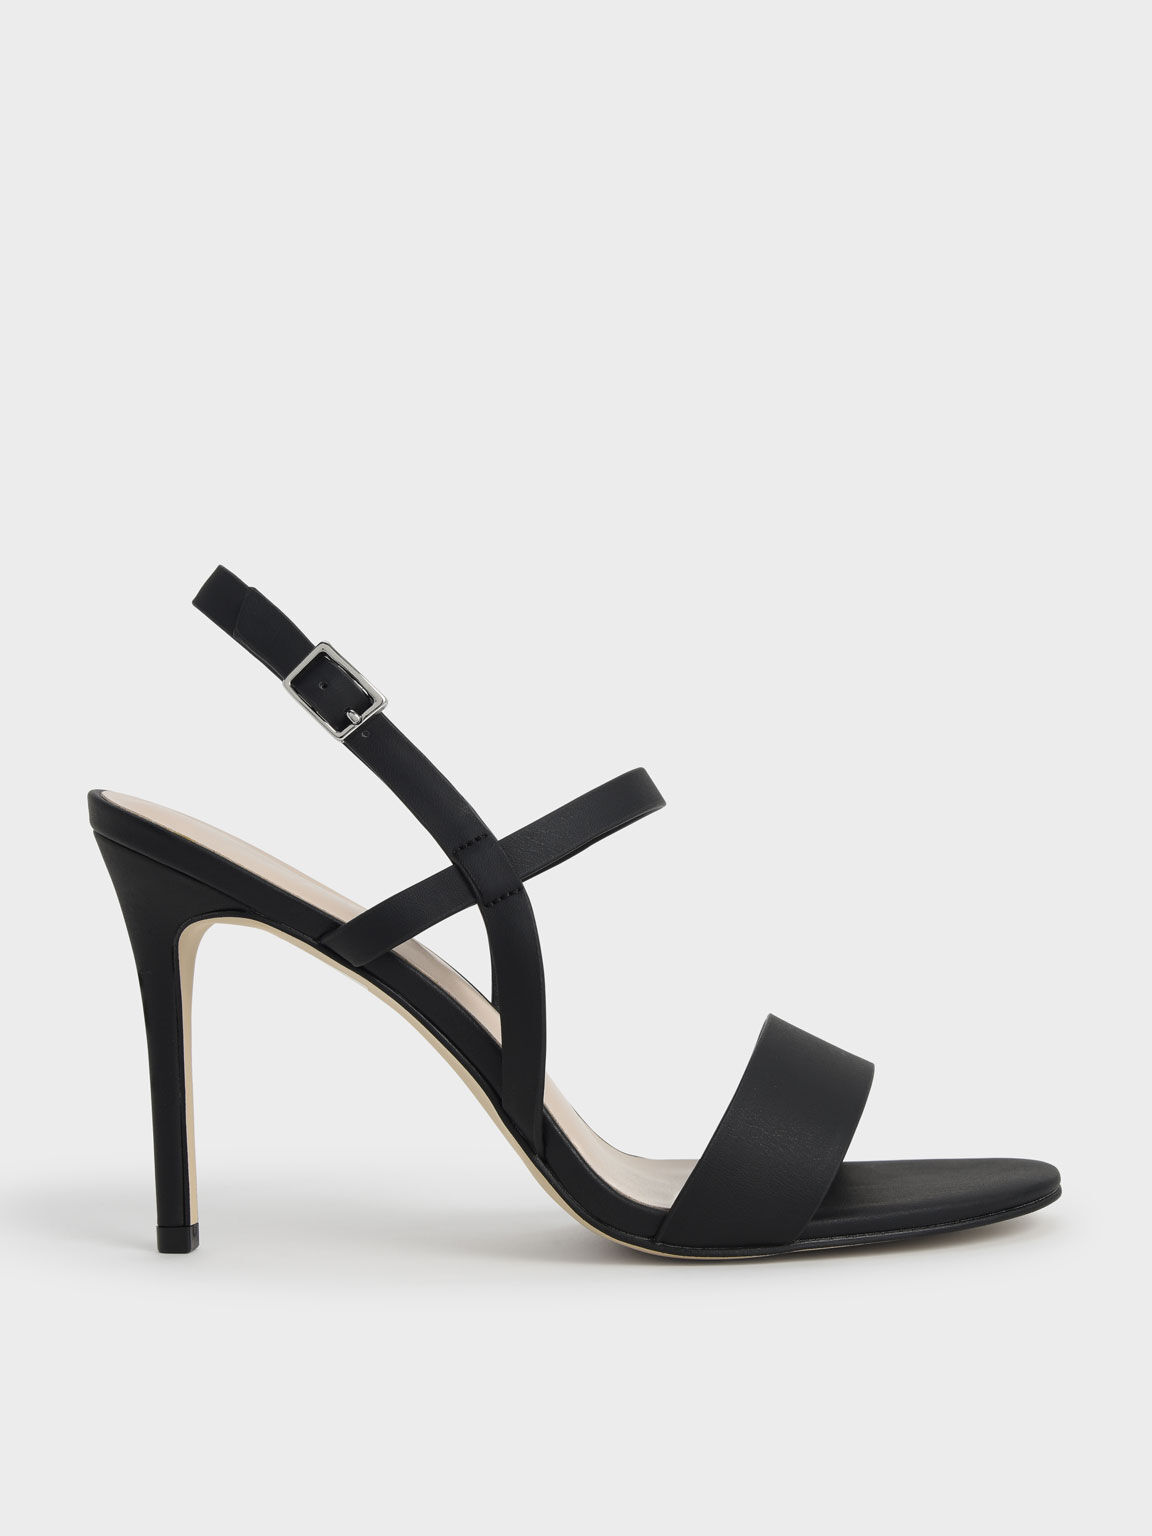 Buy > charles and keith slingback heels > in stock